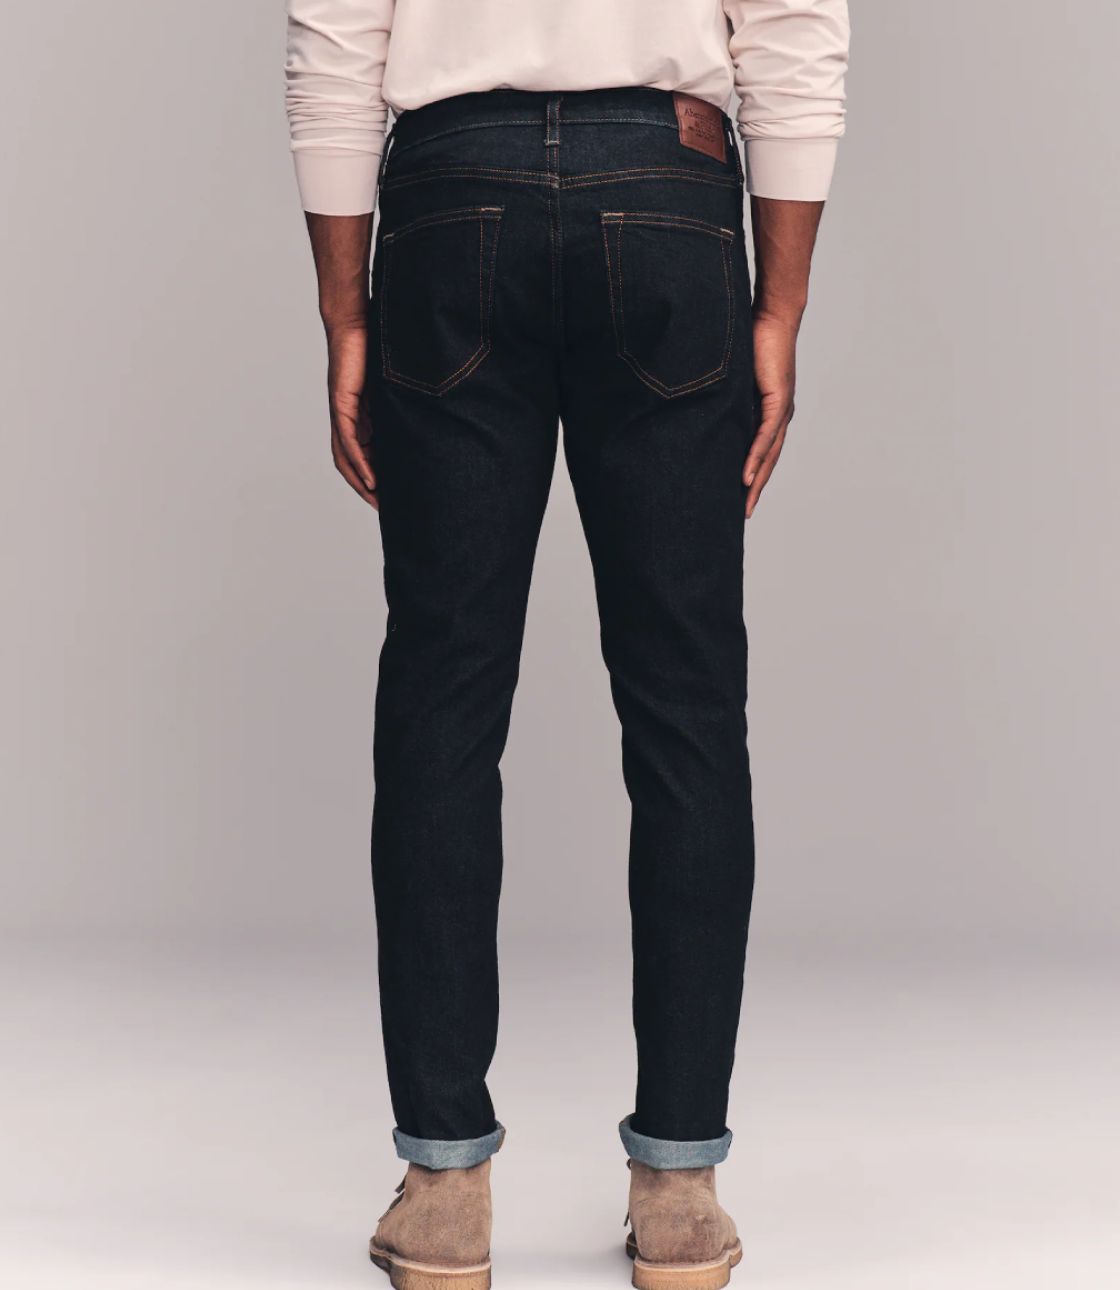 Quần Jeans Abercrombie & Fitch Skinny Fit 26